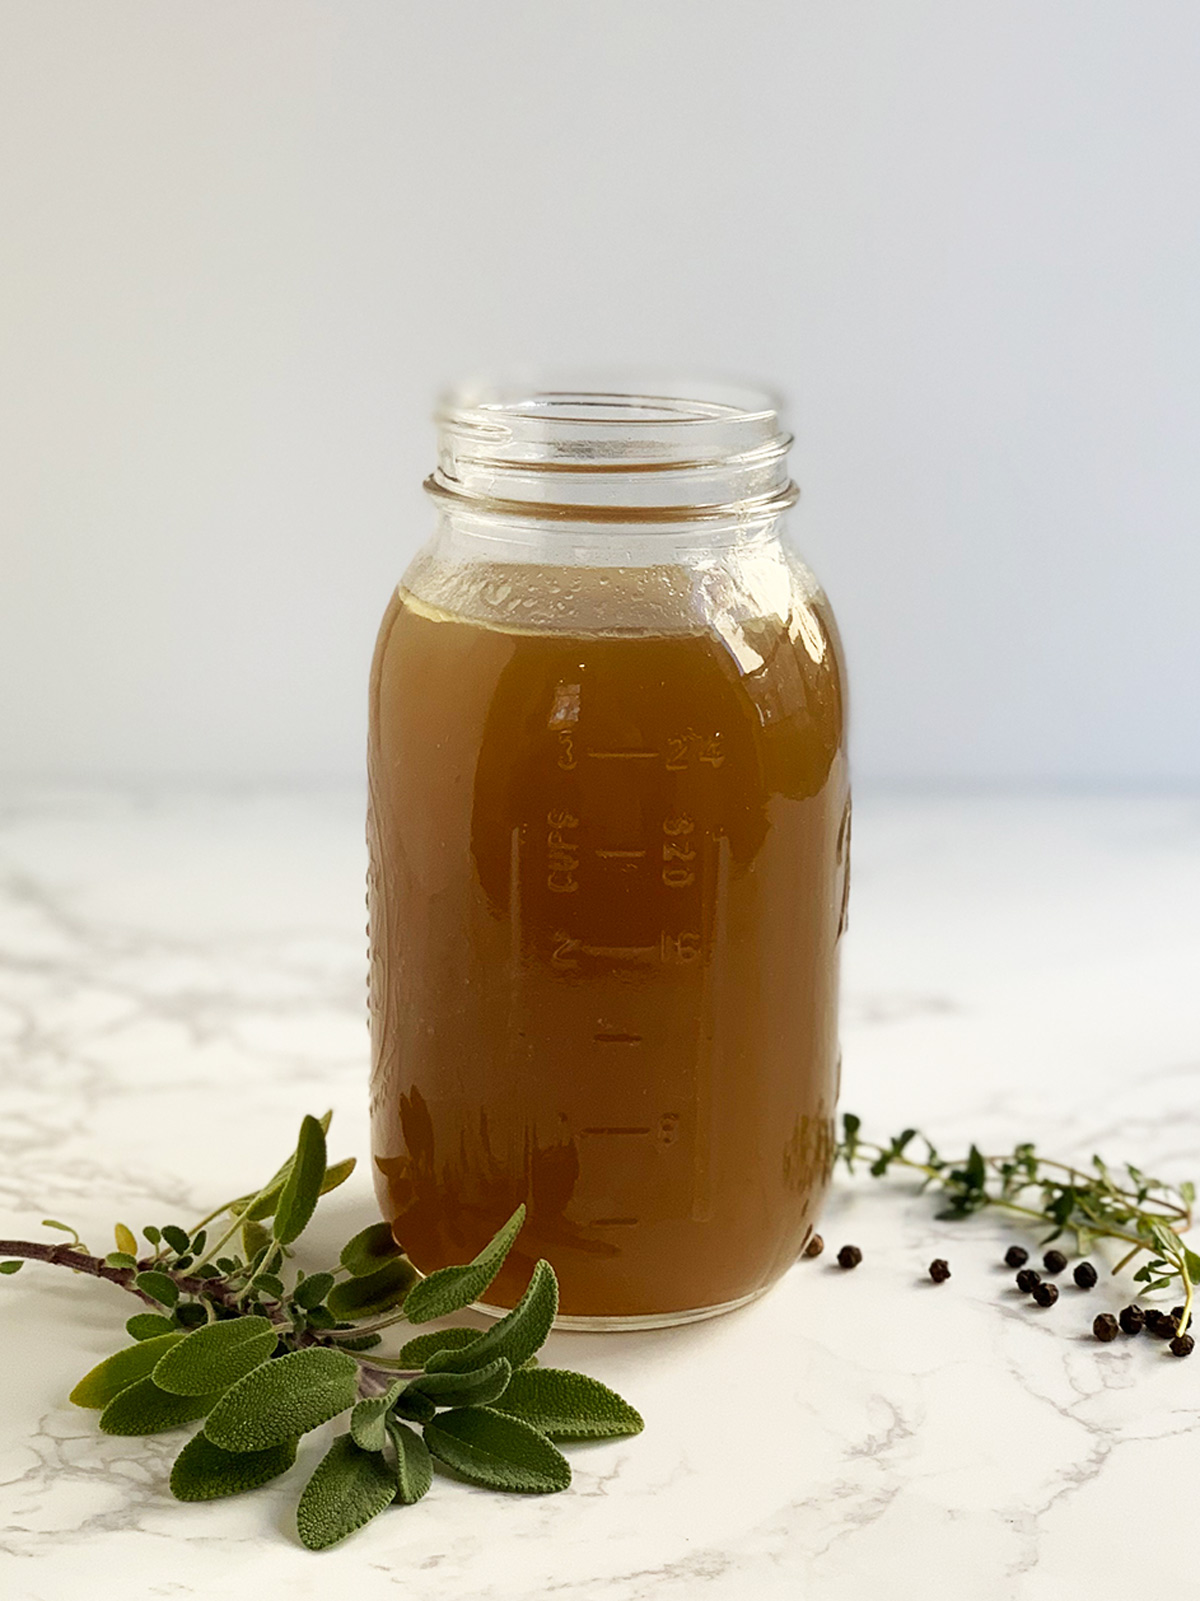 Turkey stock in glass jar with thyme, sage and peppercorns.